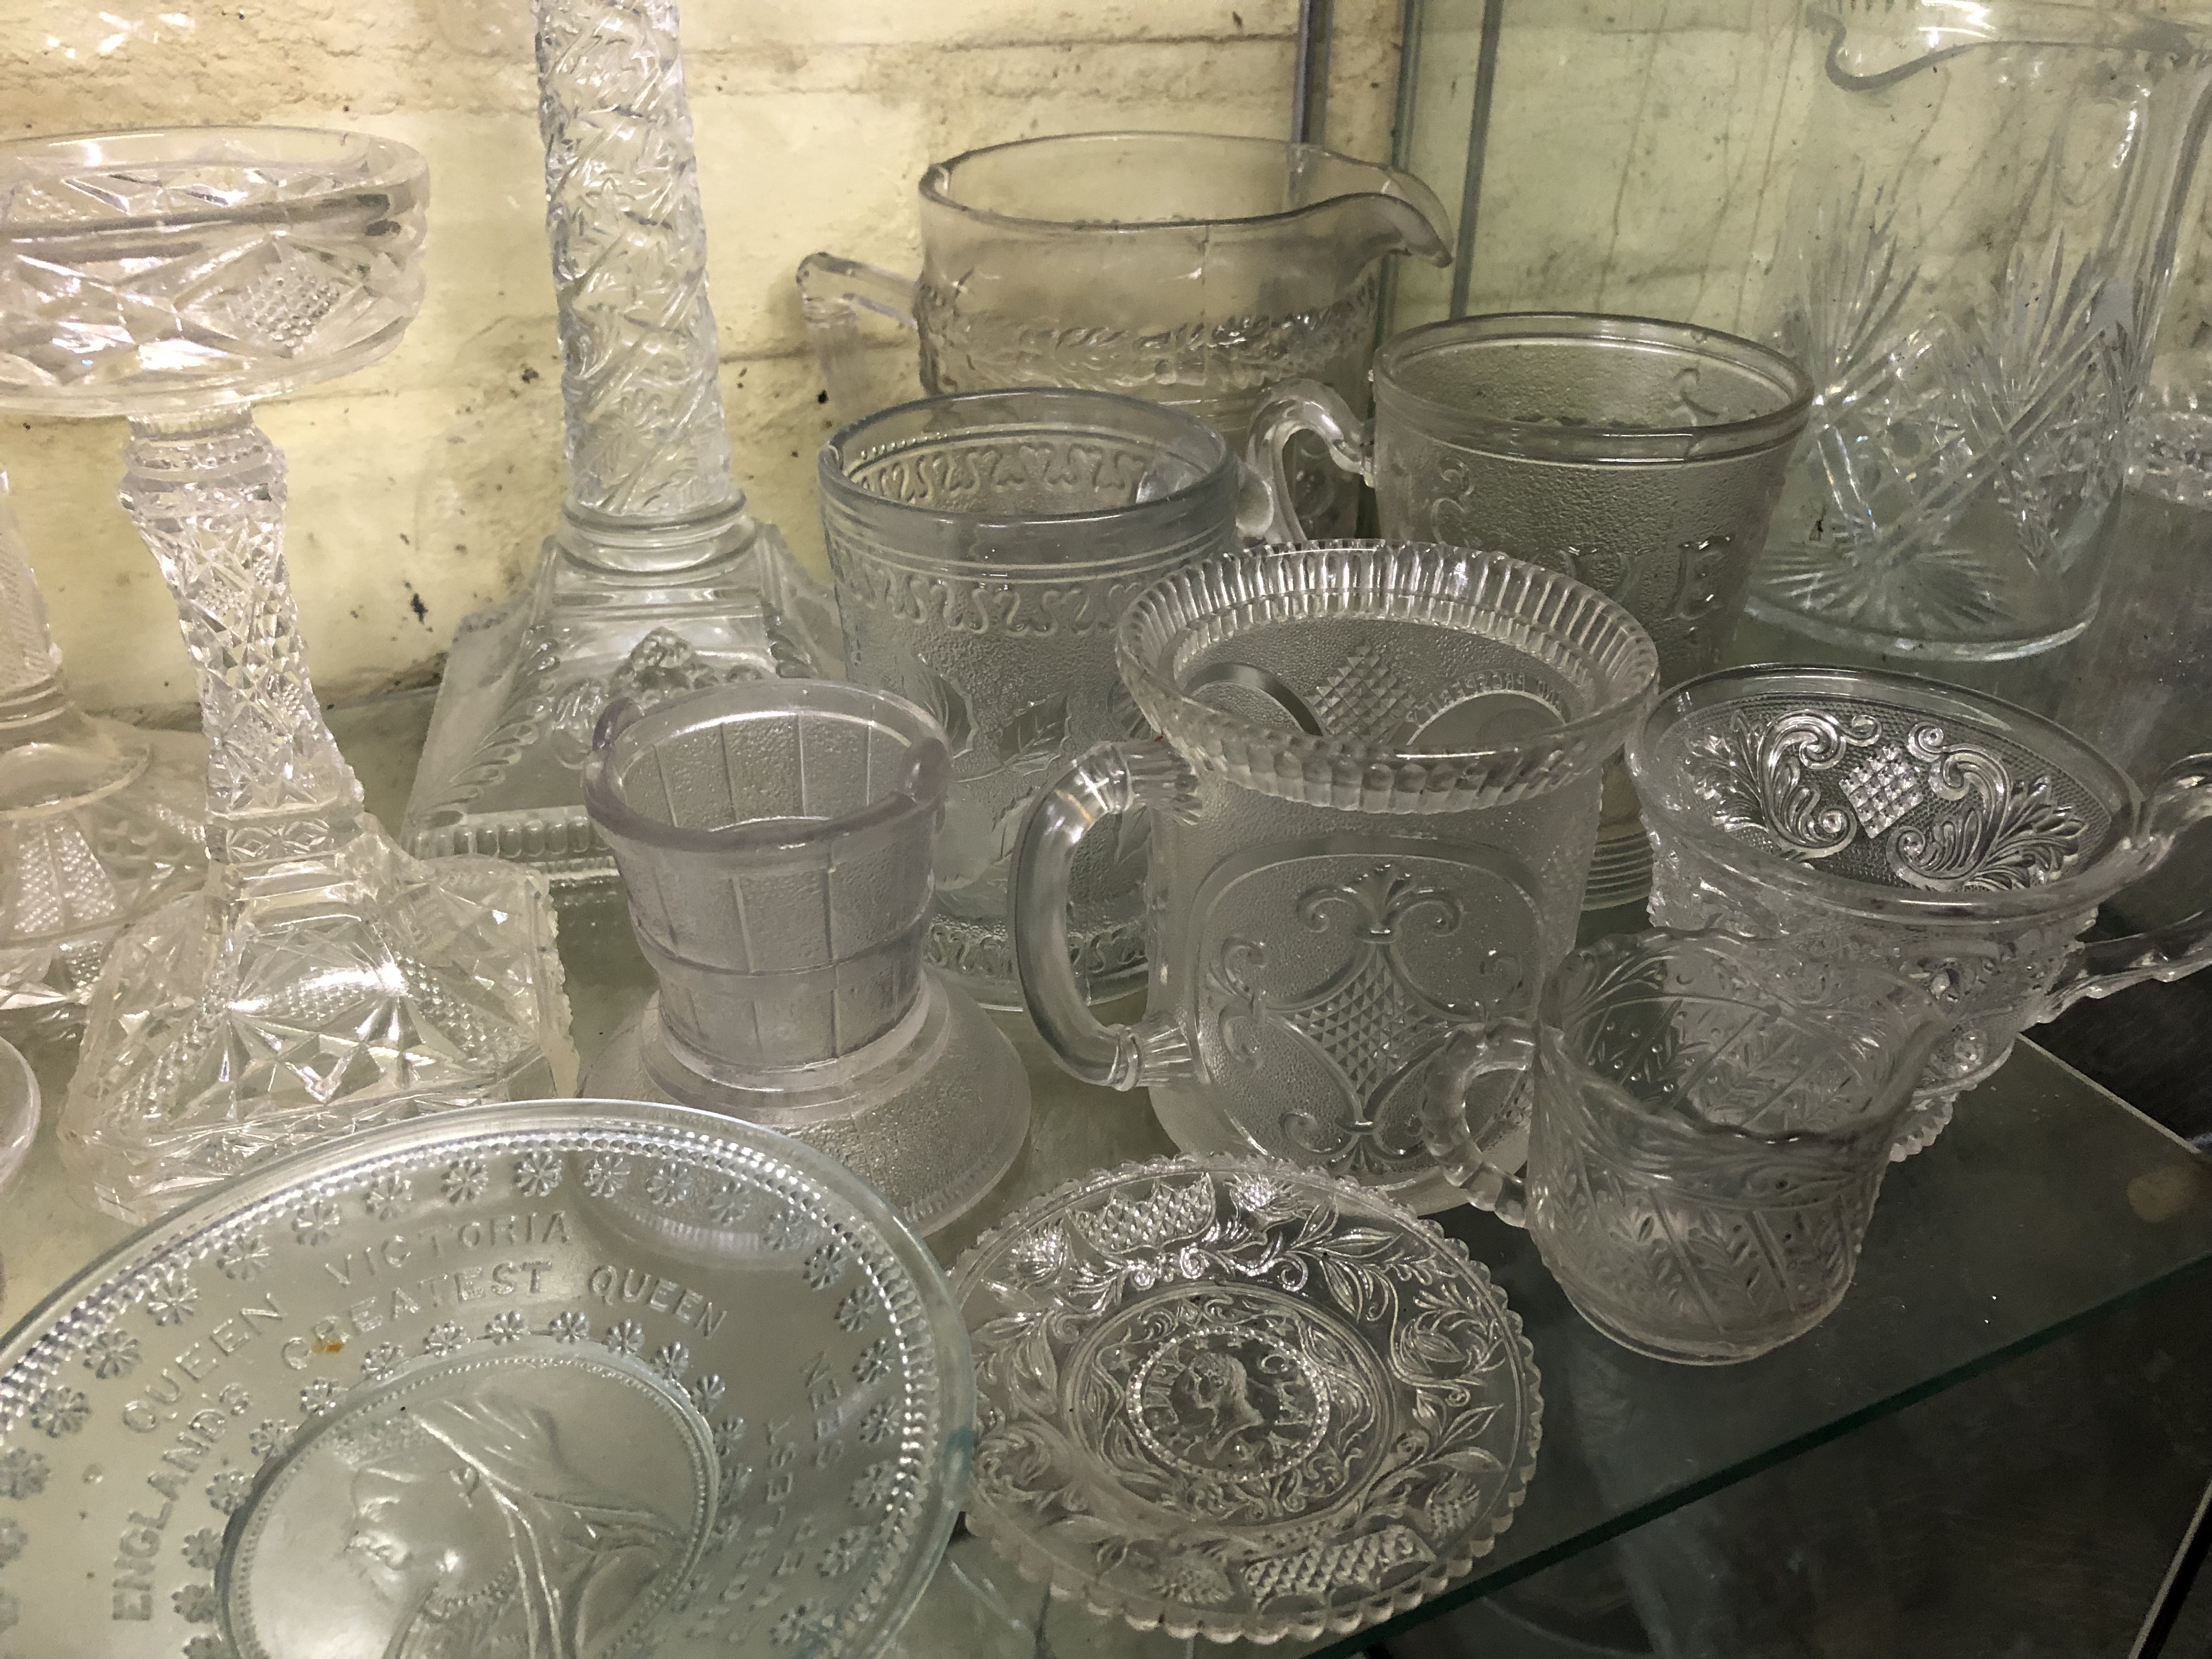 SELECTION OF MAINLY 19TH CENTURY PRESSED GLASSWARE BY SOWERBY, GREENER, SMALL COMMEMORATIVE DISHES, - Image 2 of 5